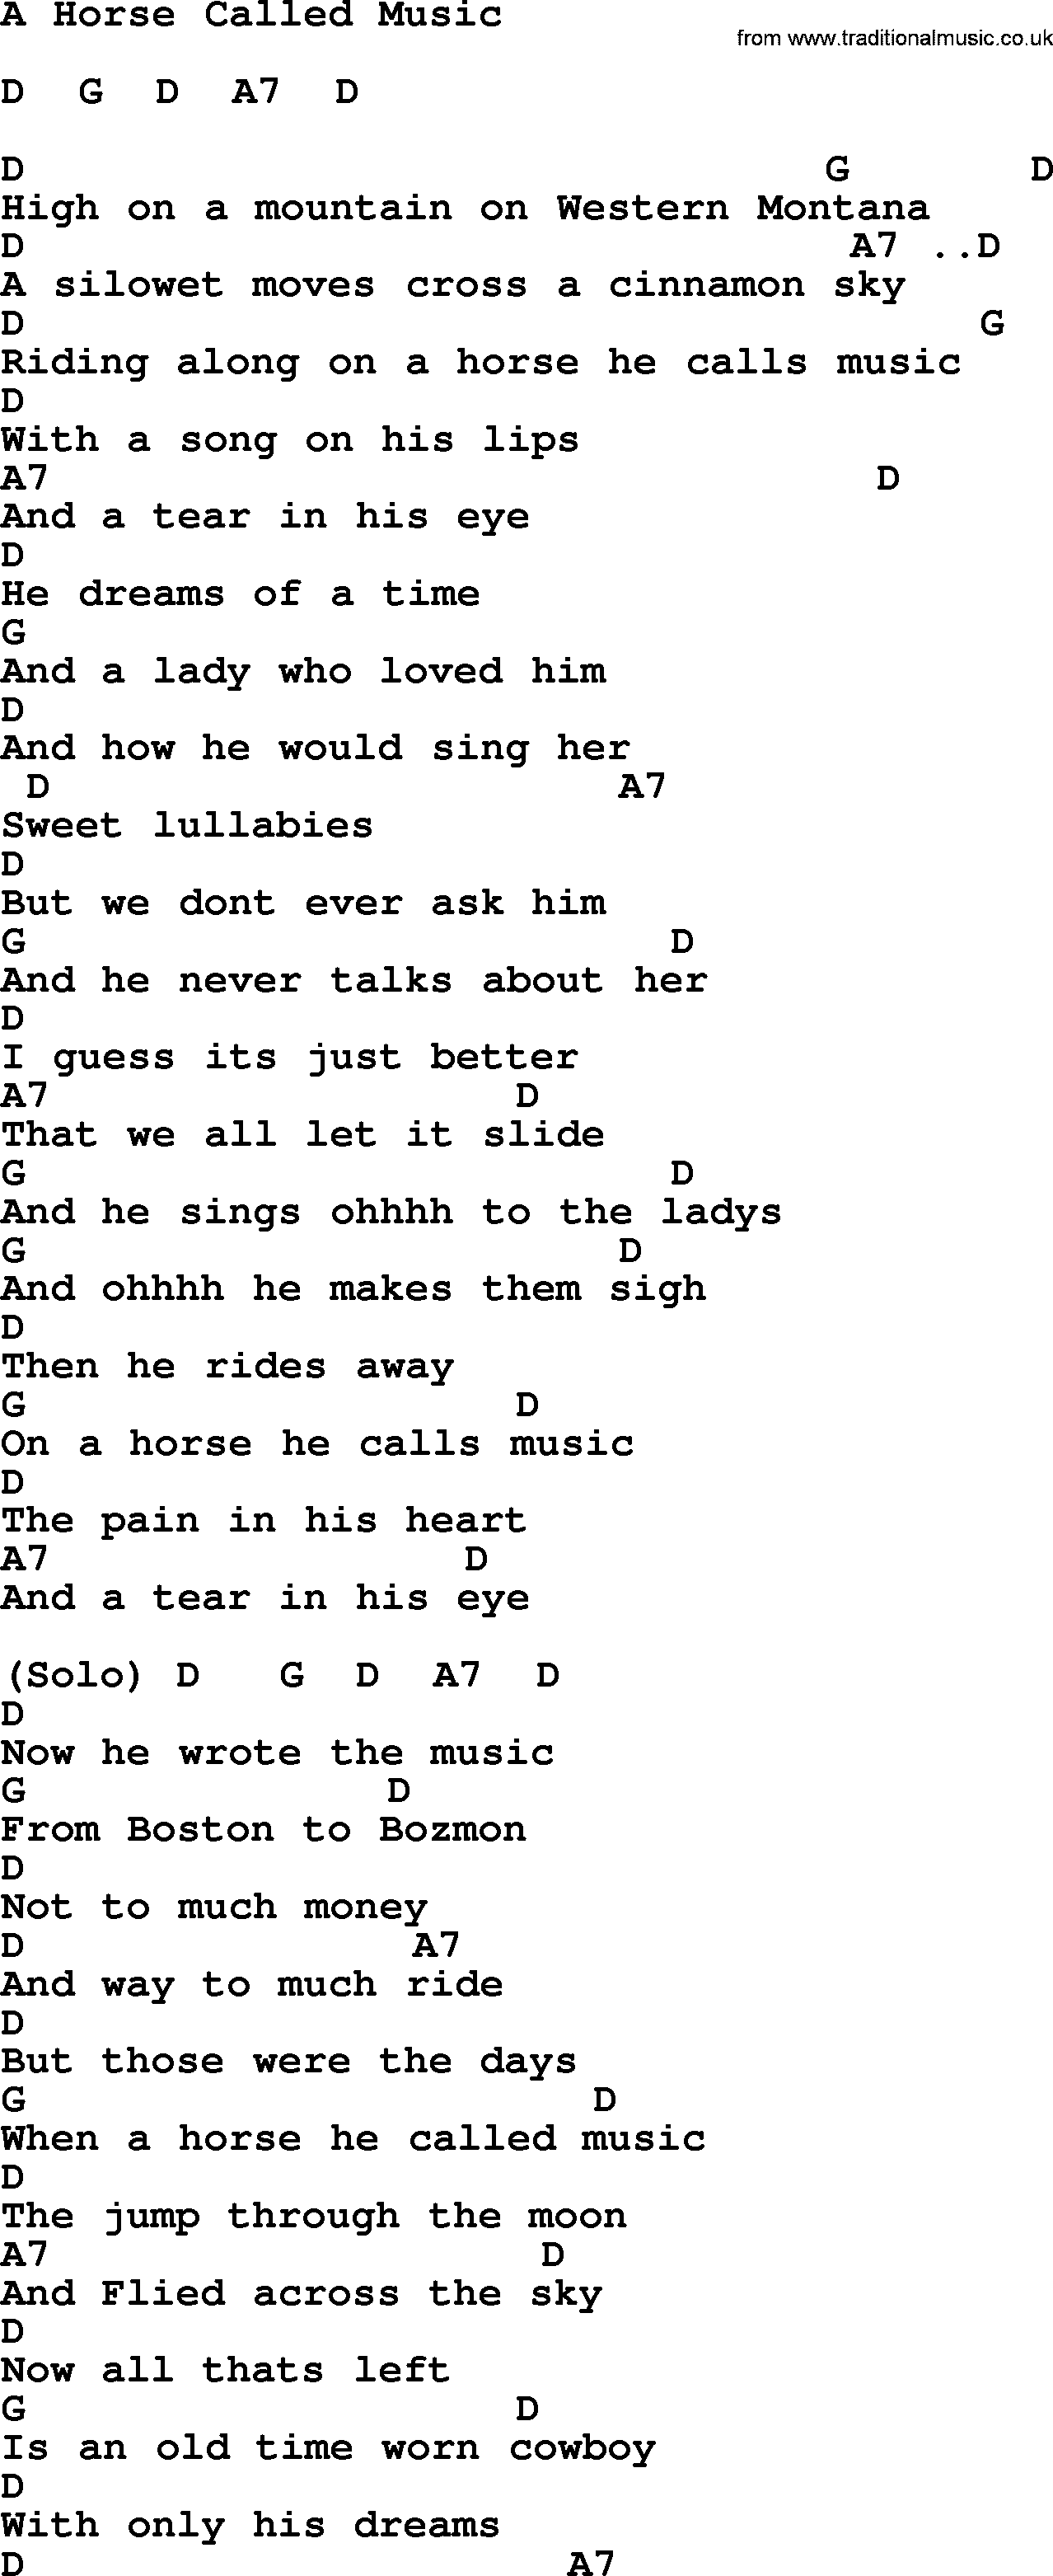 Willie Nelson song: A Horse Called Music, lyrics and chords